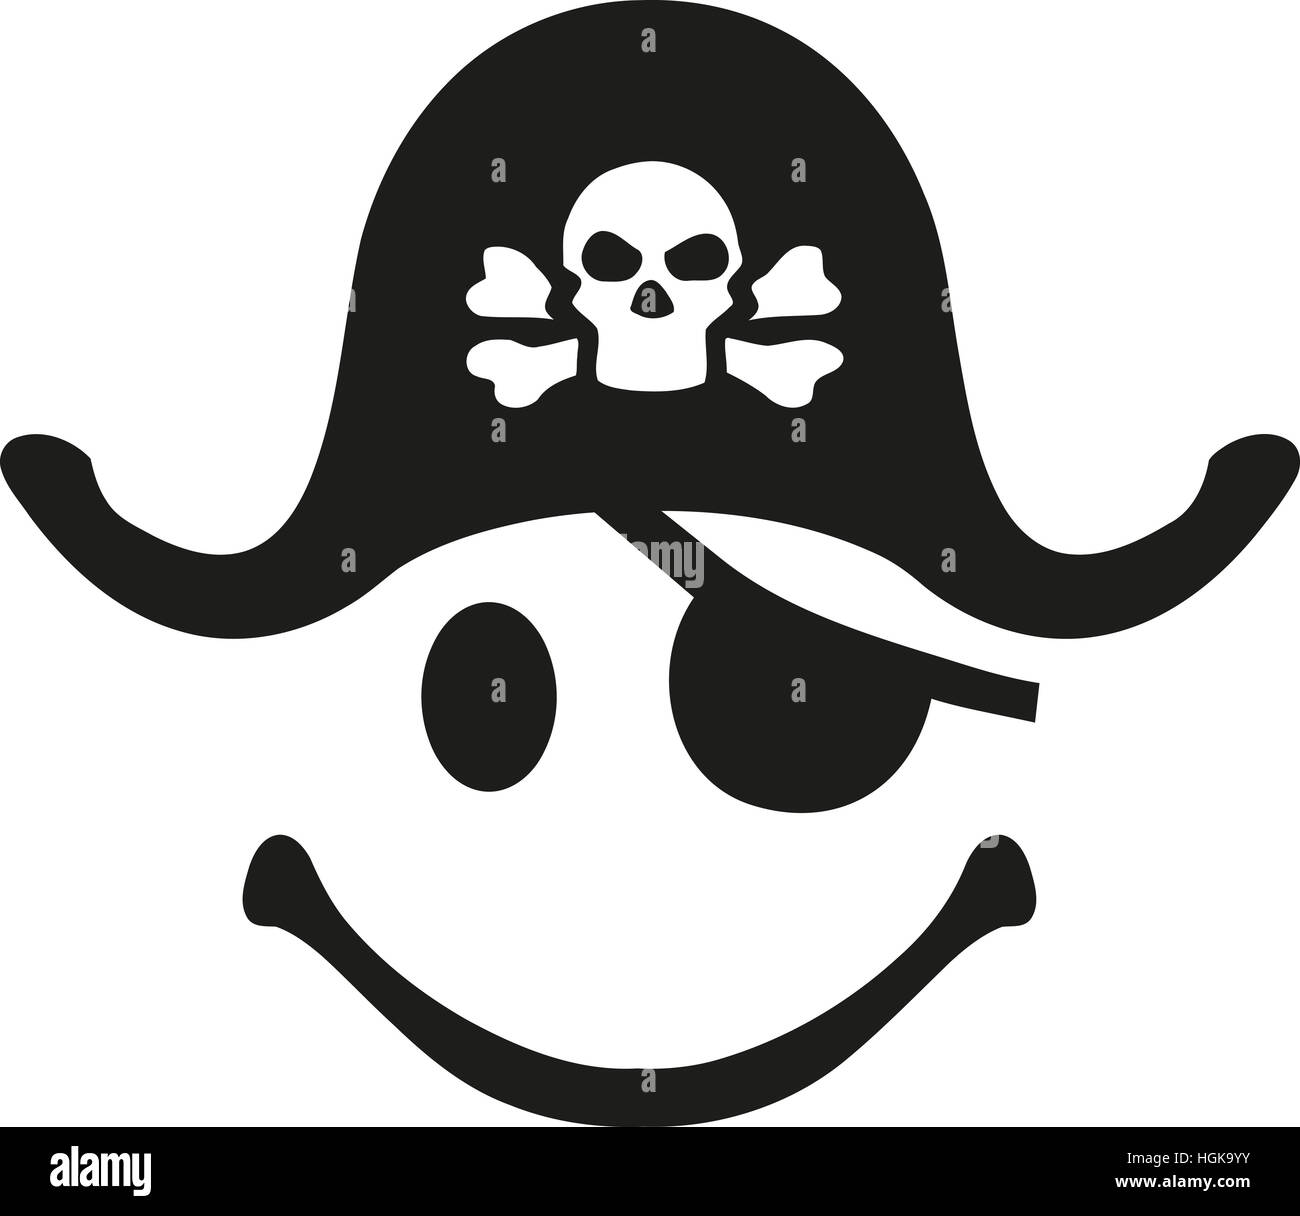 Pirate smiley face Stock Photo